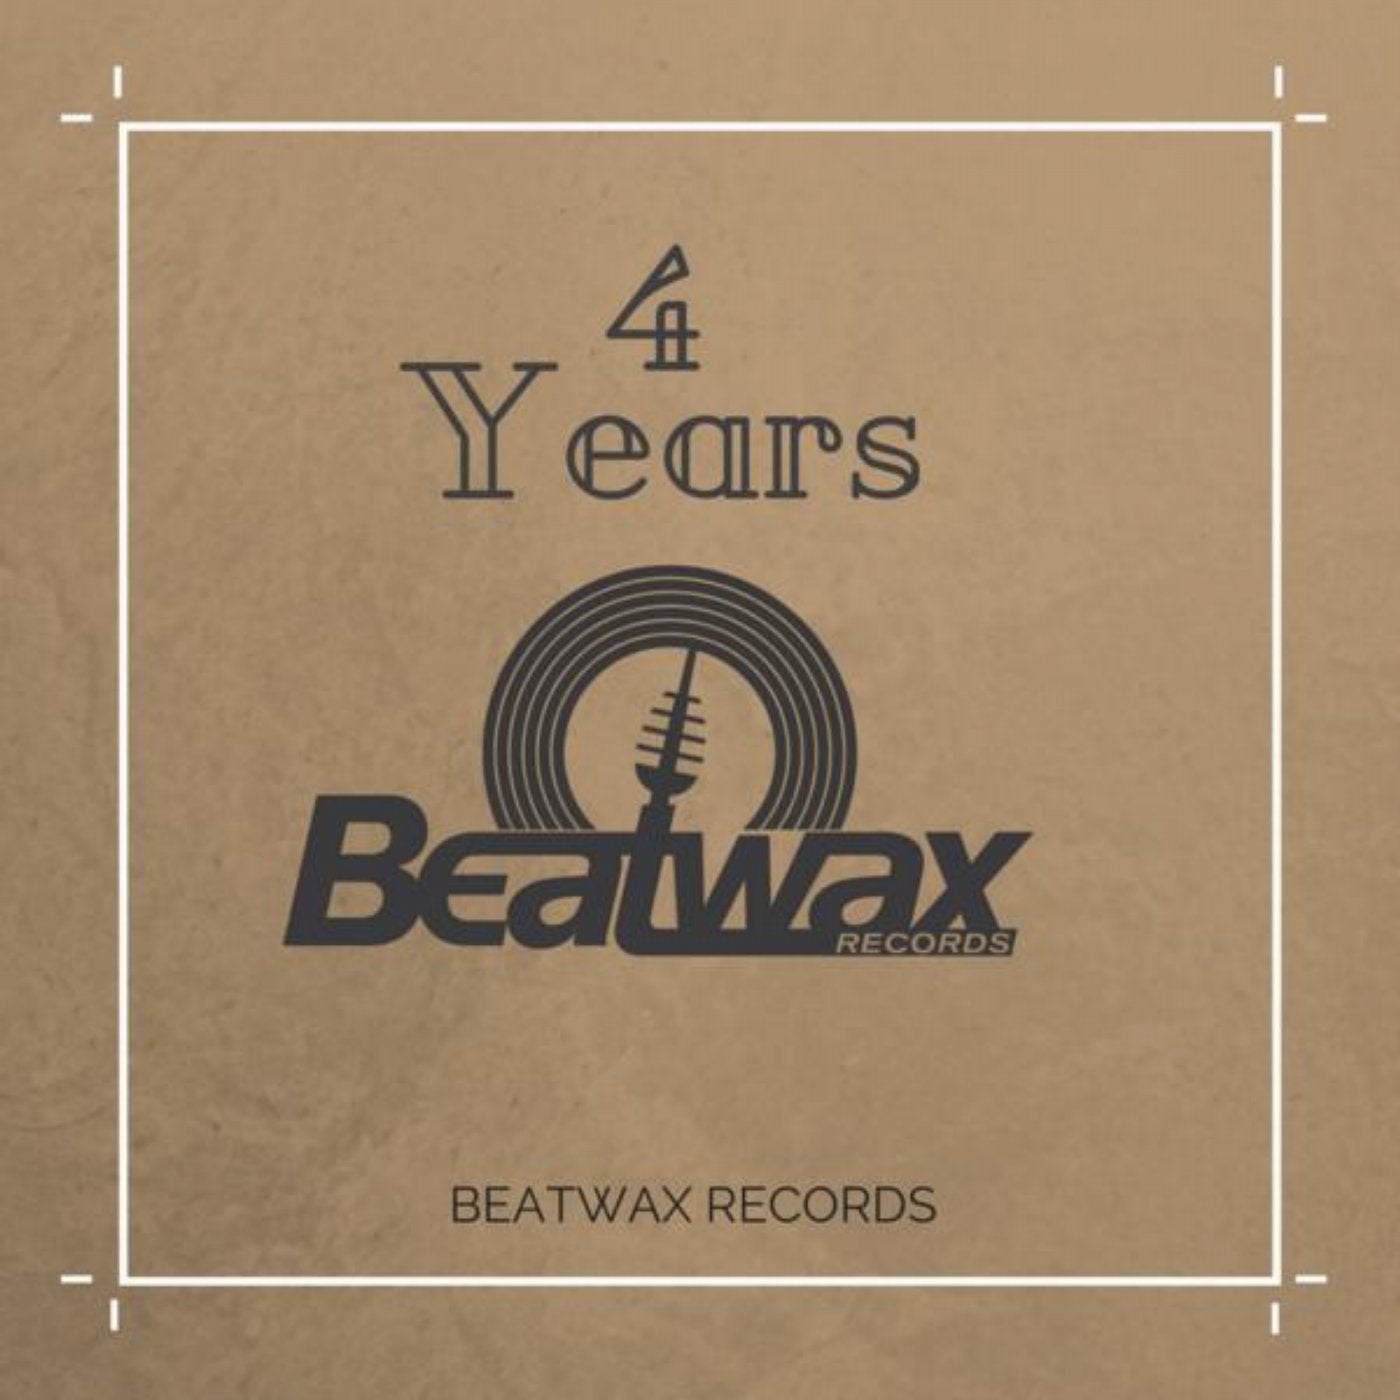 Best of 4 Years Beatwax Records